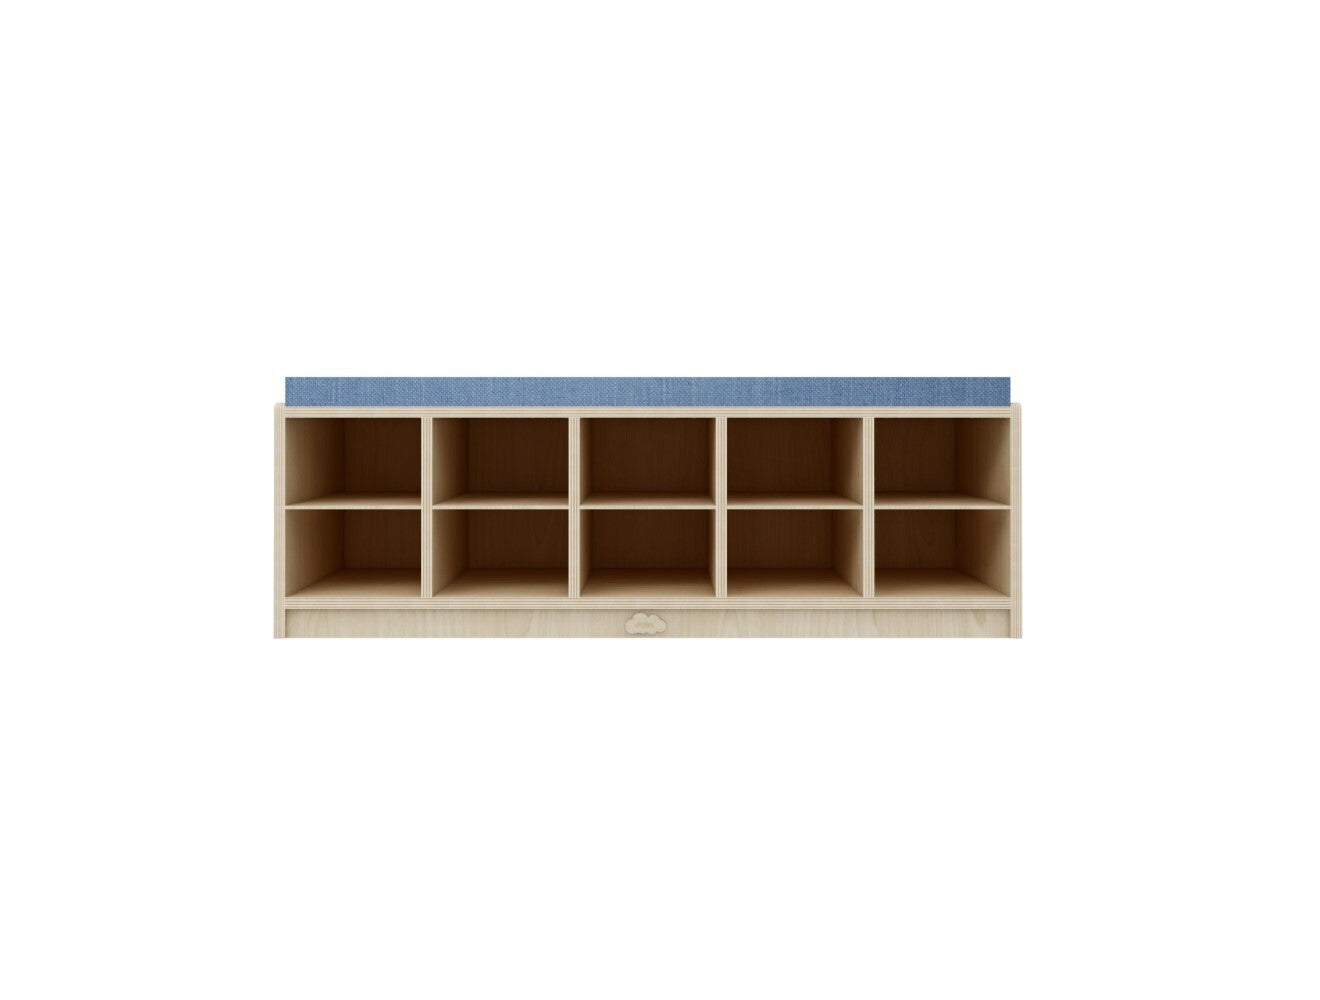 Jooyes 10 Cubbies Kids Shoes Storage Bench